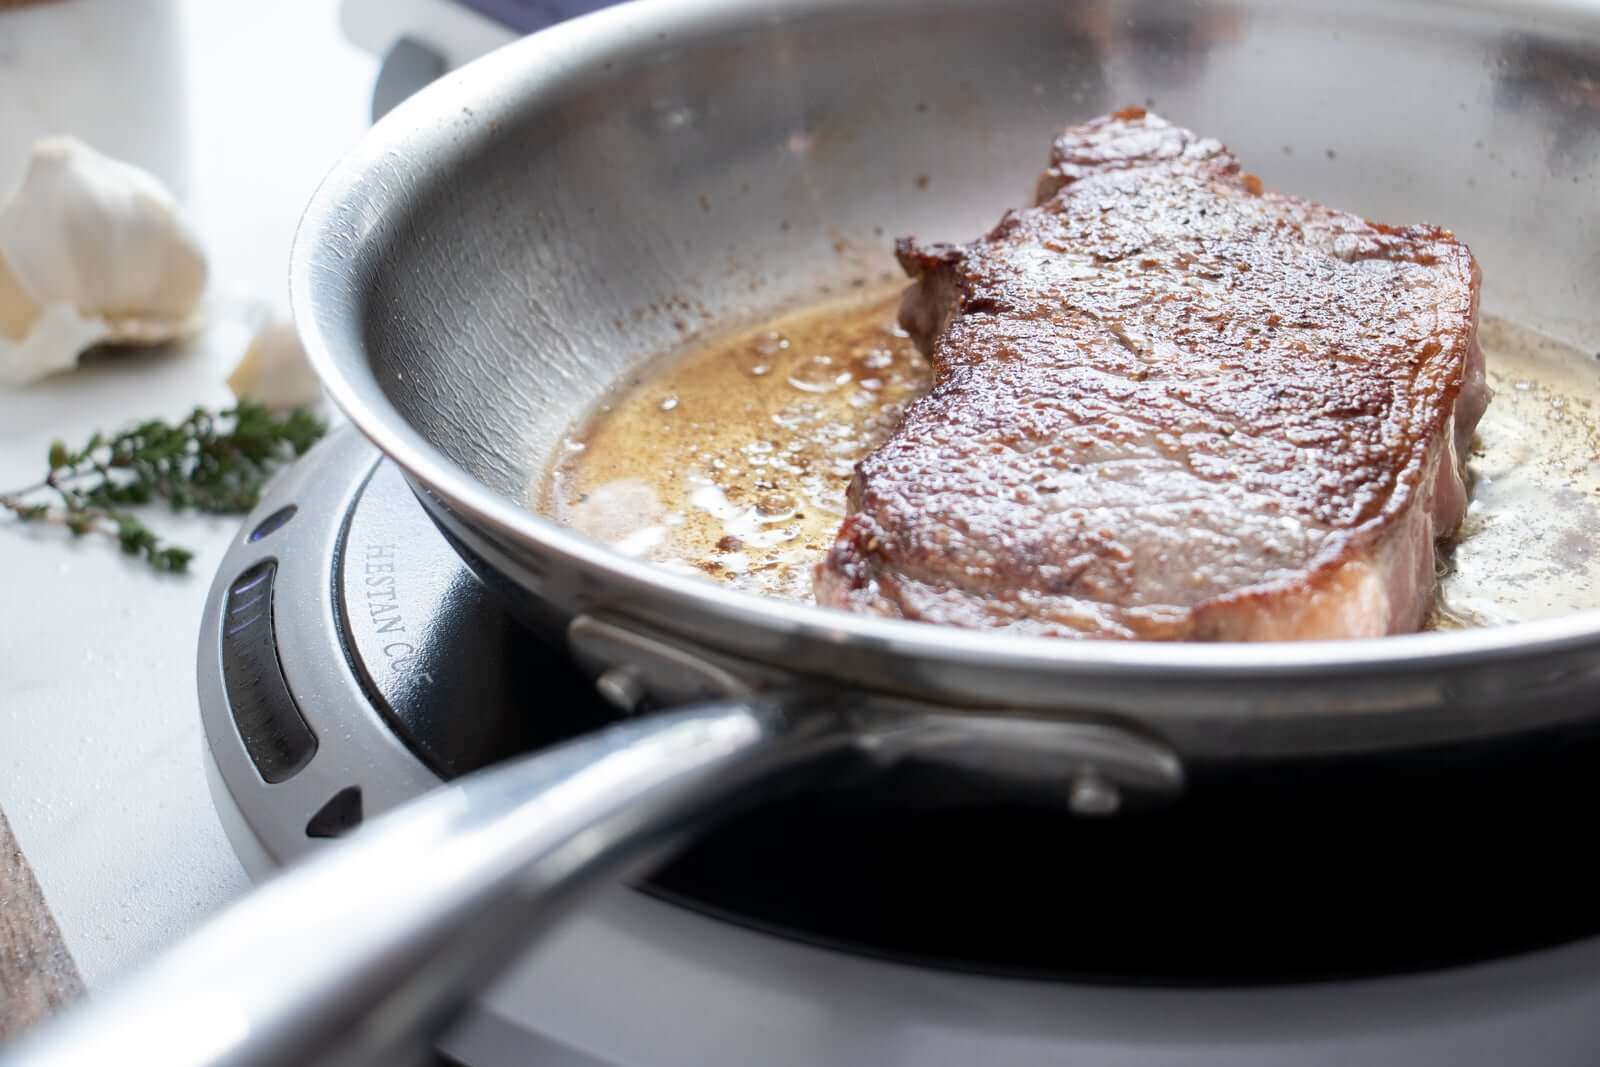 5 Skillet Cooking Techniques You Need to Know